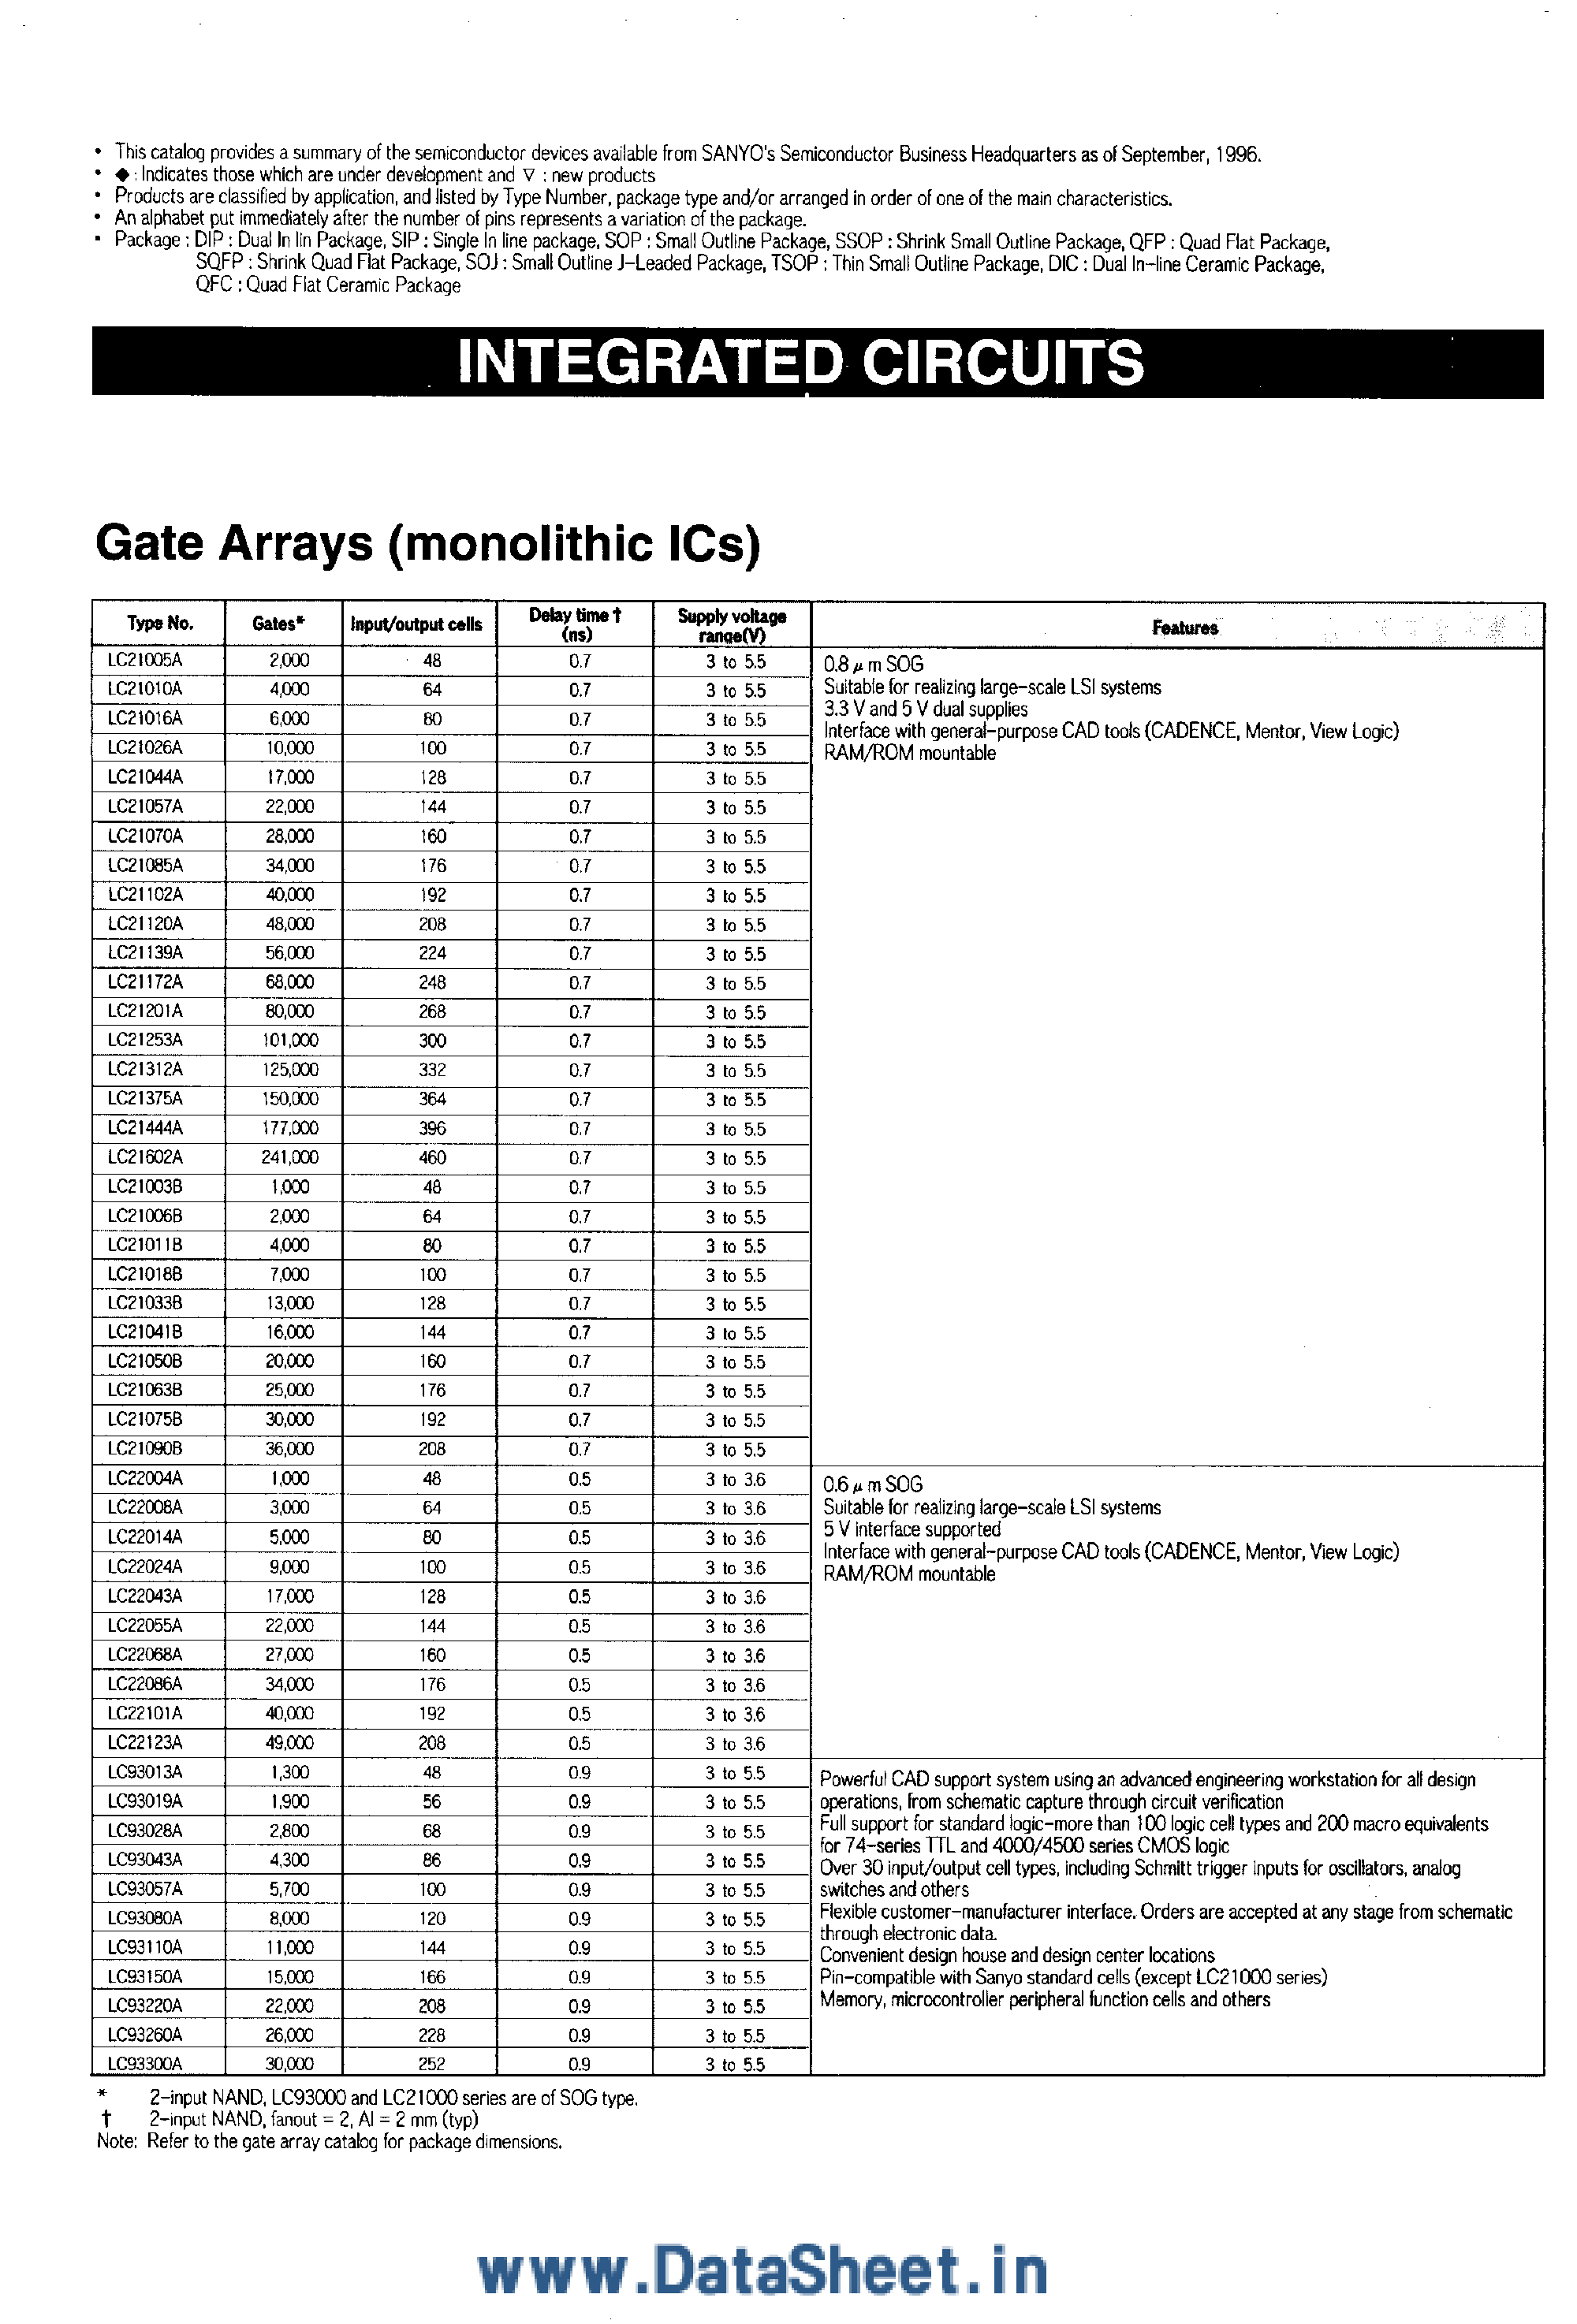 Datasheet LC21003B - (LC21005A - LC22123A) Gate Arrays Monolithic ICs page 1